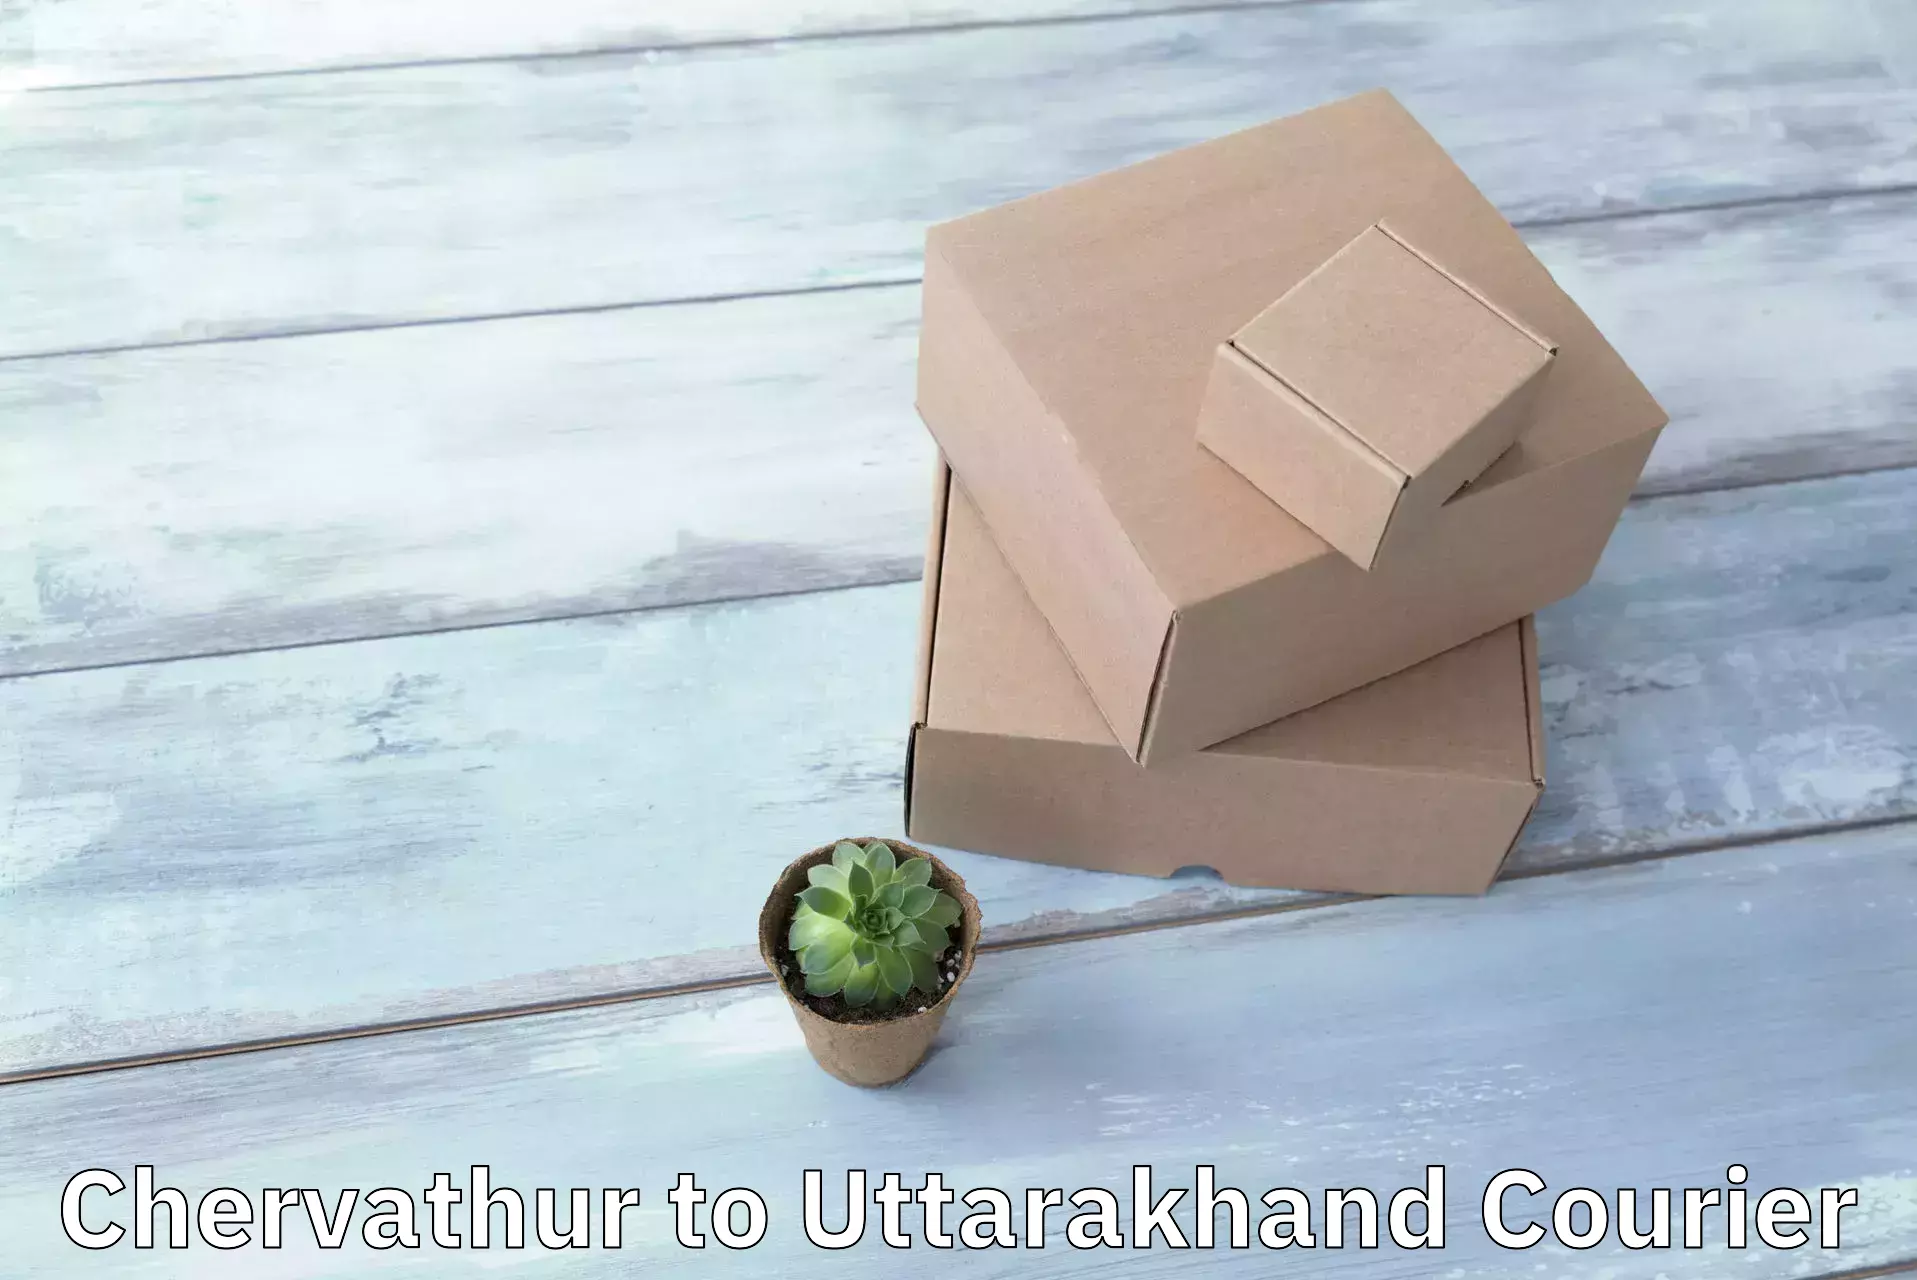 Secure shipping methods Chervathur to Tanakpur